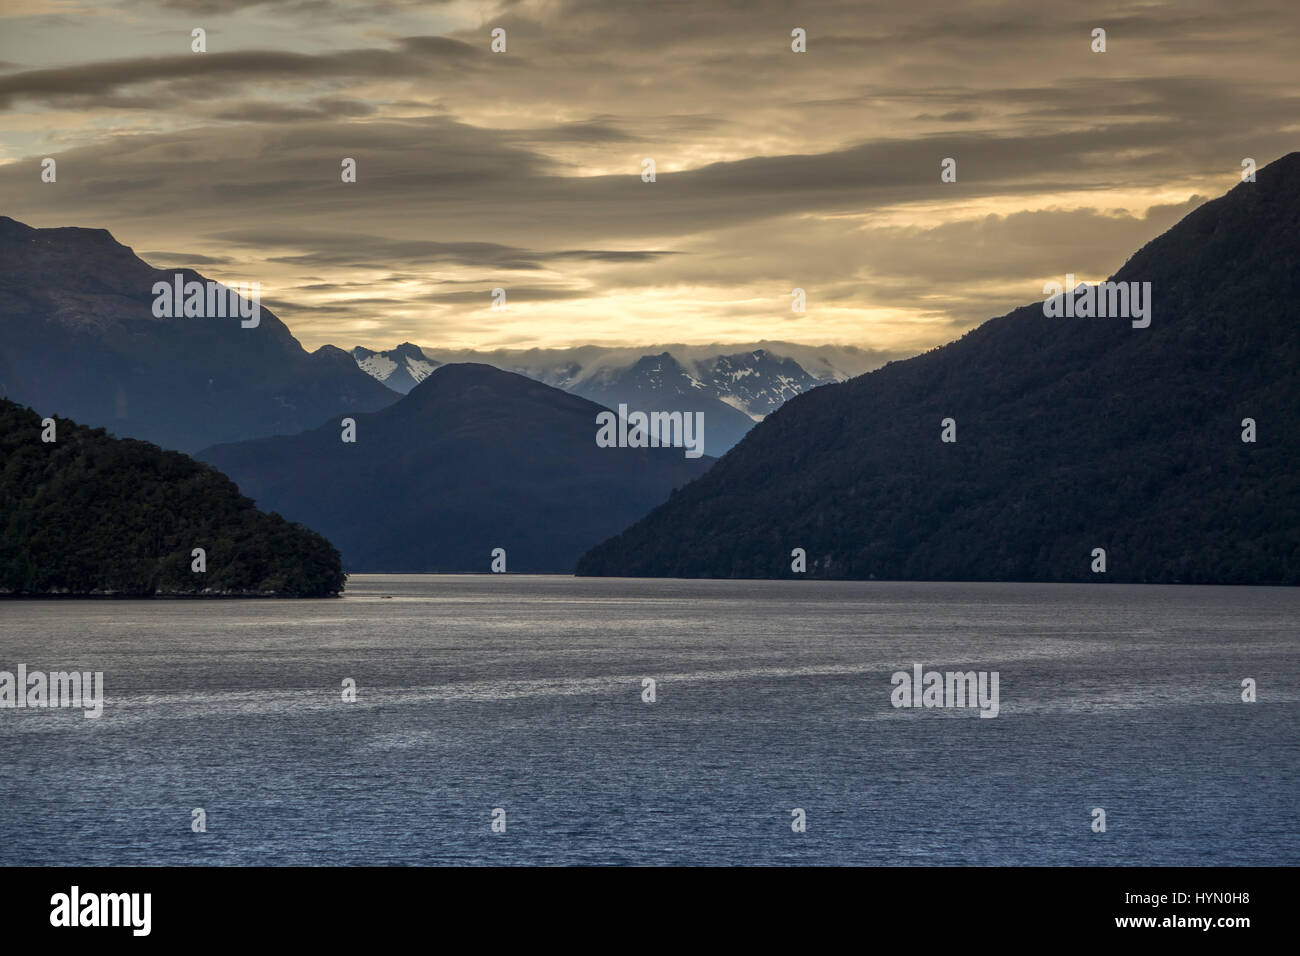 Sun Rise In Doubtful Sound A Fiord In Fiordland South Island New Zealand Imposing Mountains With Snow Capped Peaks Stock Photo